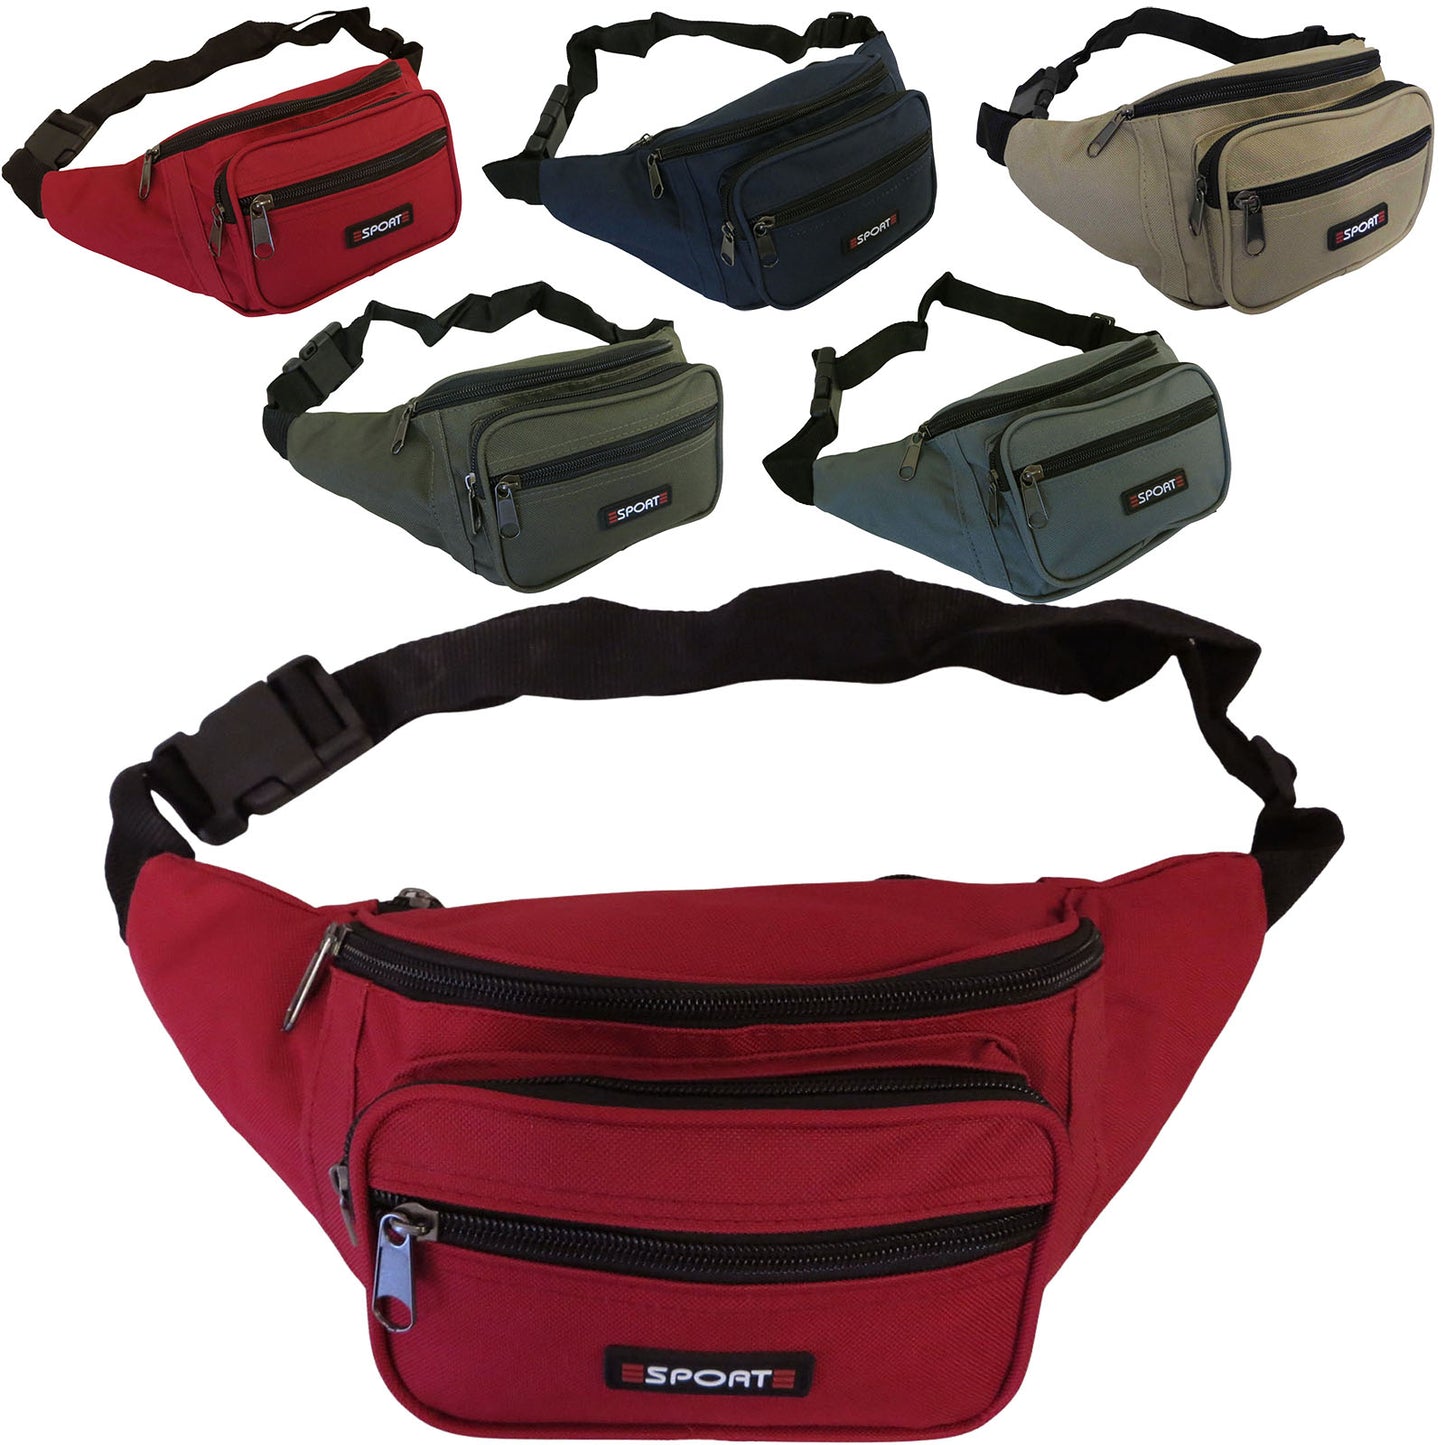 wholesale fanny pack waist bag in assorted colors for men and women